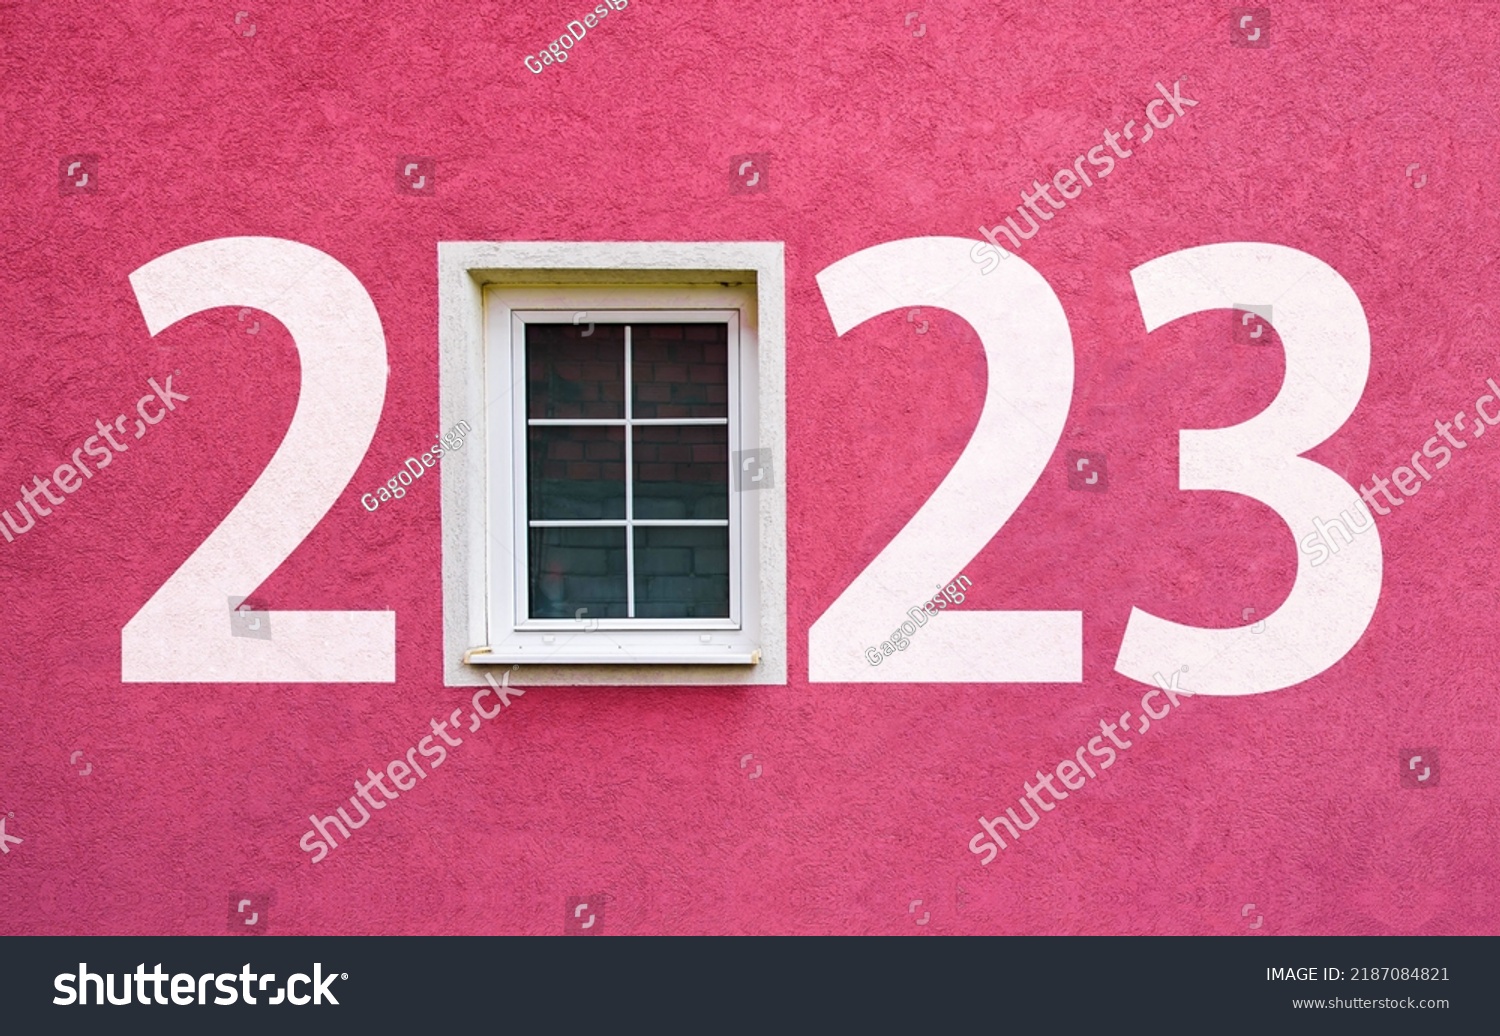 Happy new year 2023. Year 2023 on wall with window  #2187084821